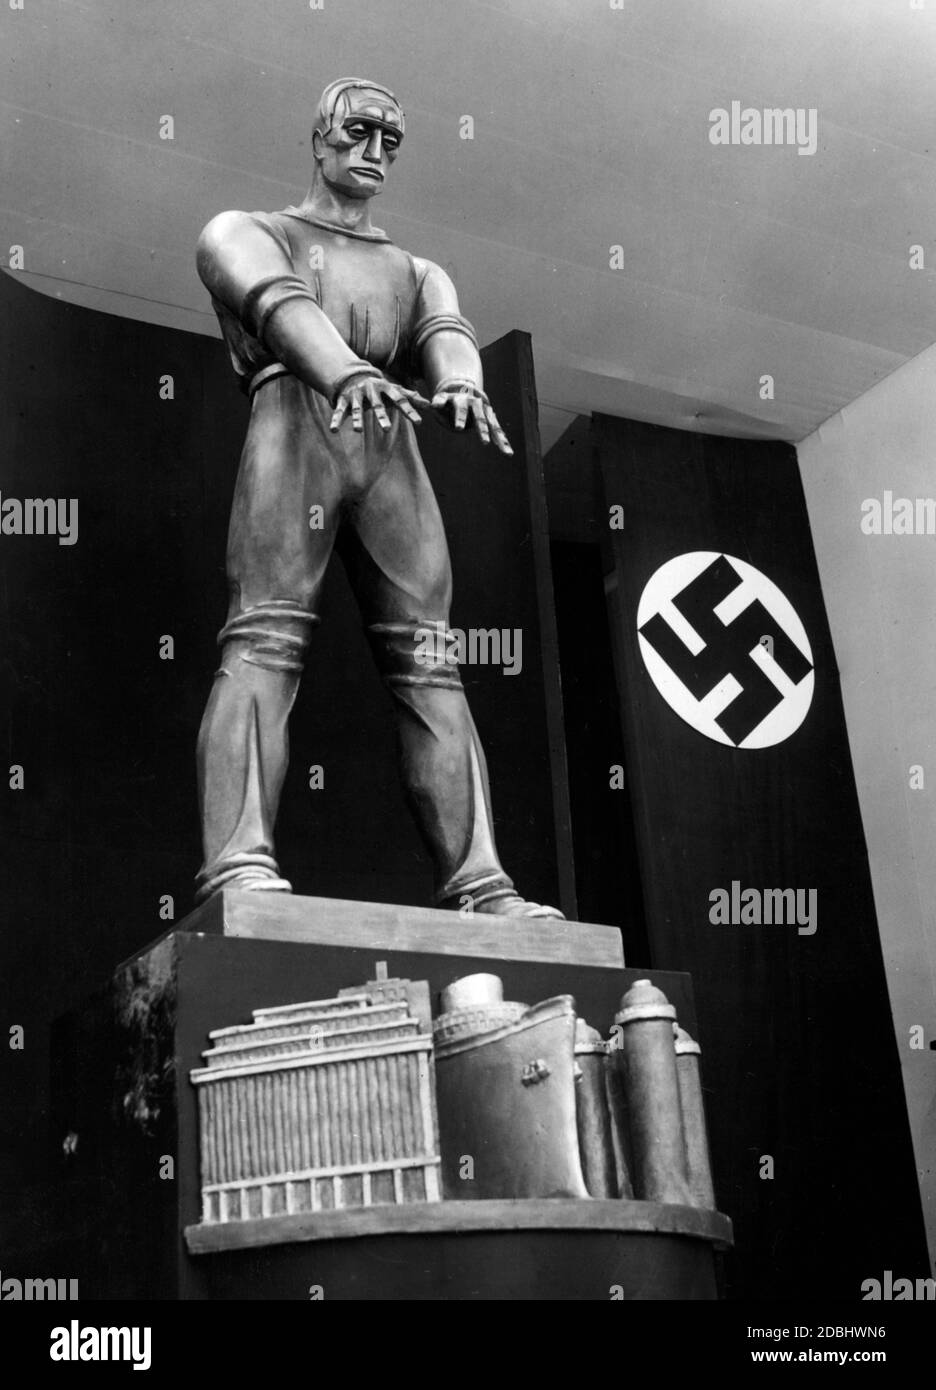 'The ''Reichsberufsgruppen der Angestellten in der DAF'' organized a job exhibition in the Neue Welt with the motto ''The Employee in the German Economy''. Here, a symbolic representation of the employee.' Stock Photo